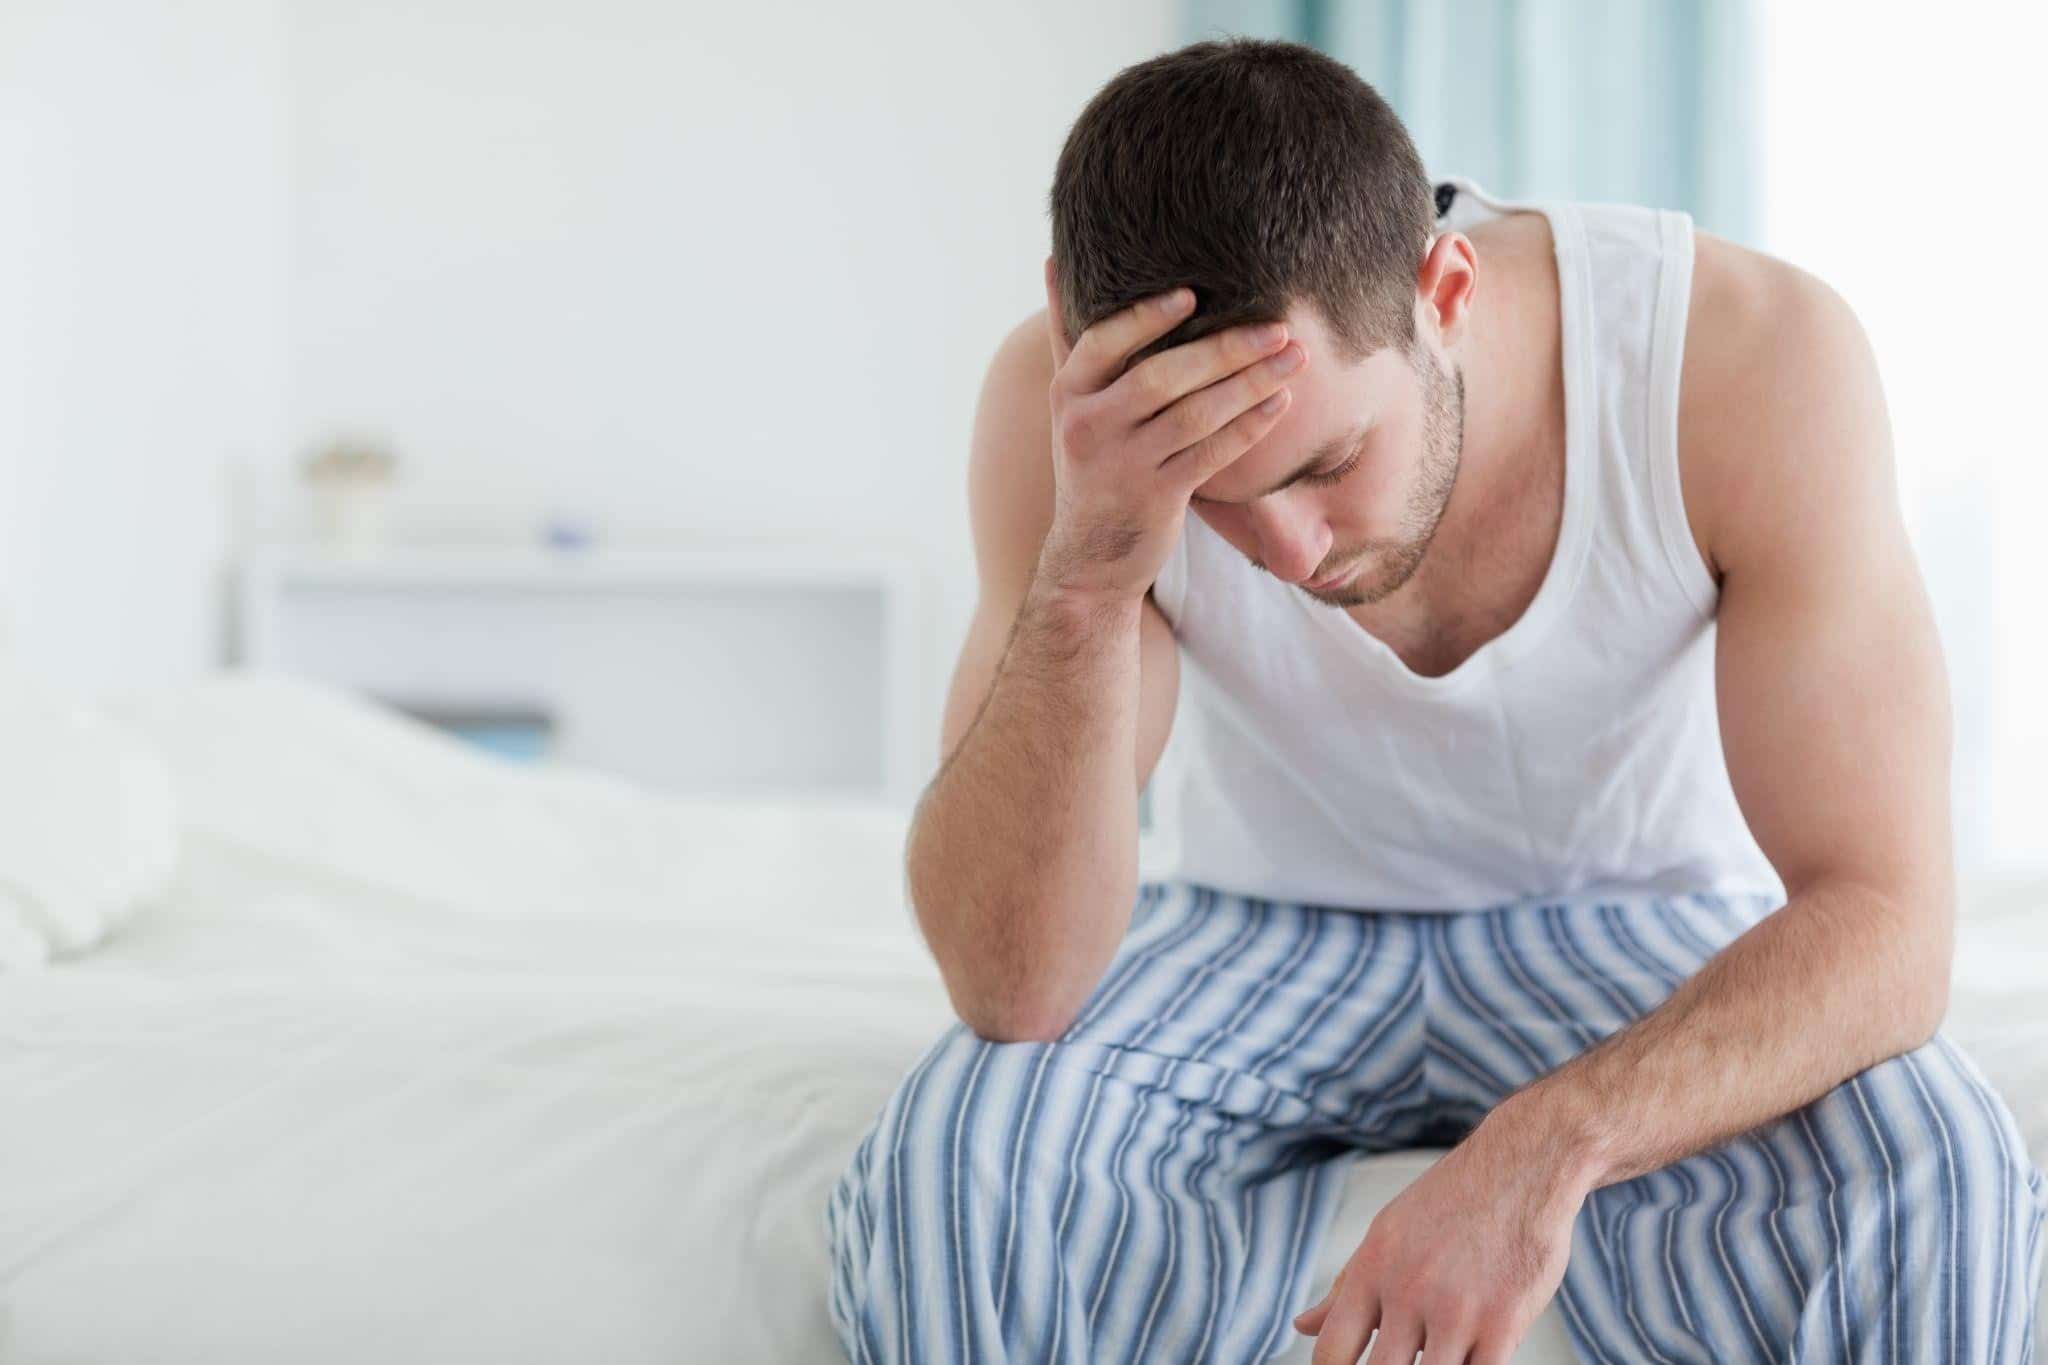 A sick man in a white tank top and striped pajama pants sits on the corner of his bed, holding his forehead in pain.